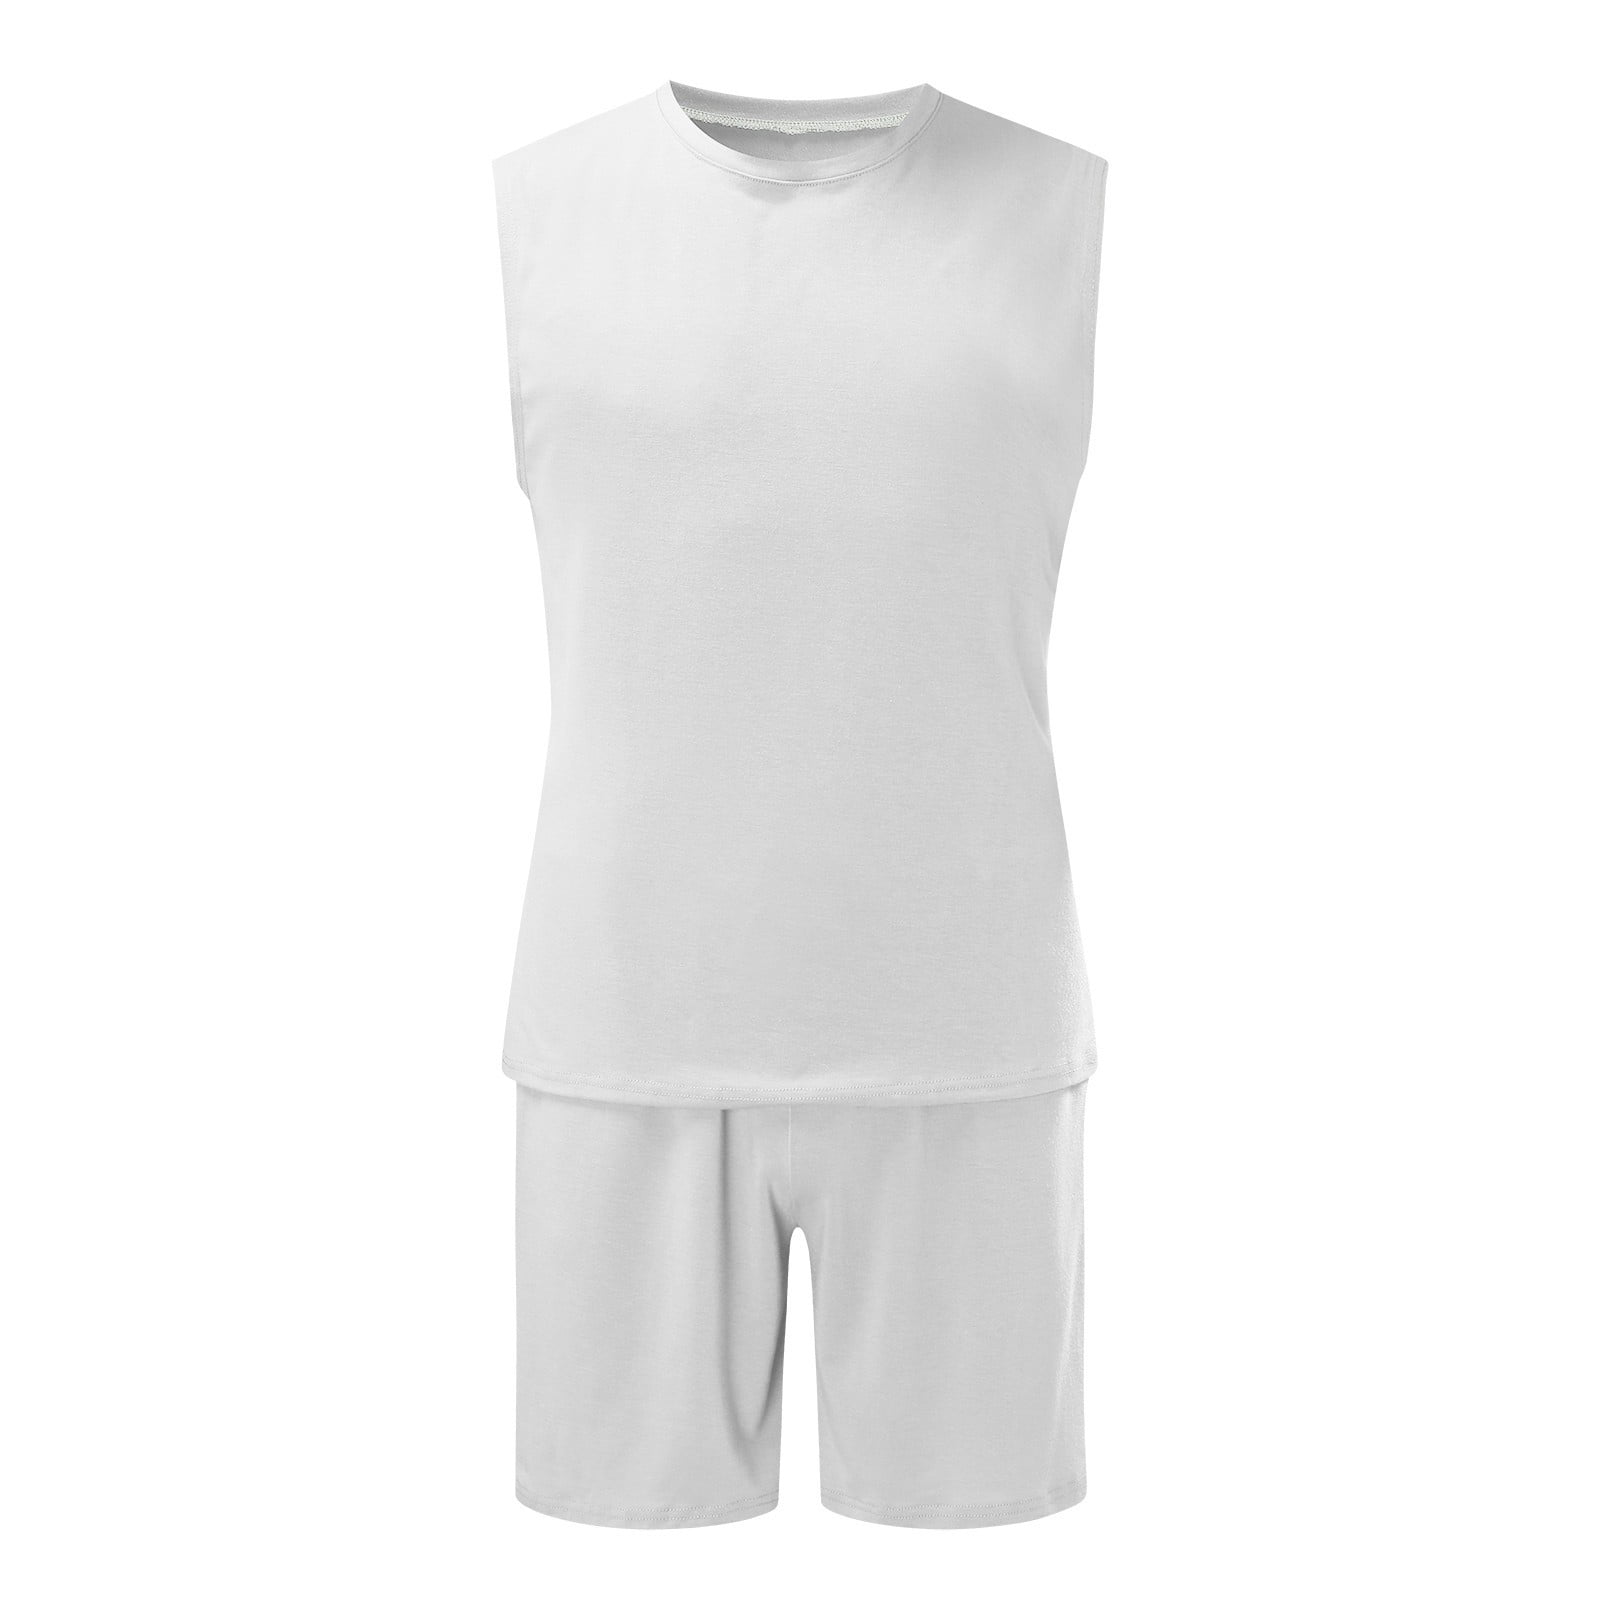 White Suit Men's Spring Summer 2-Piece Beach Sleeveless Shirts Tank Tops &  Shorts Pants Sets With Pockets